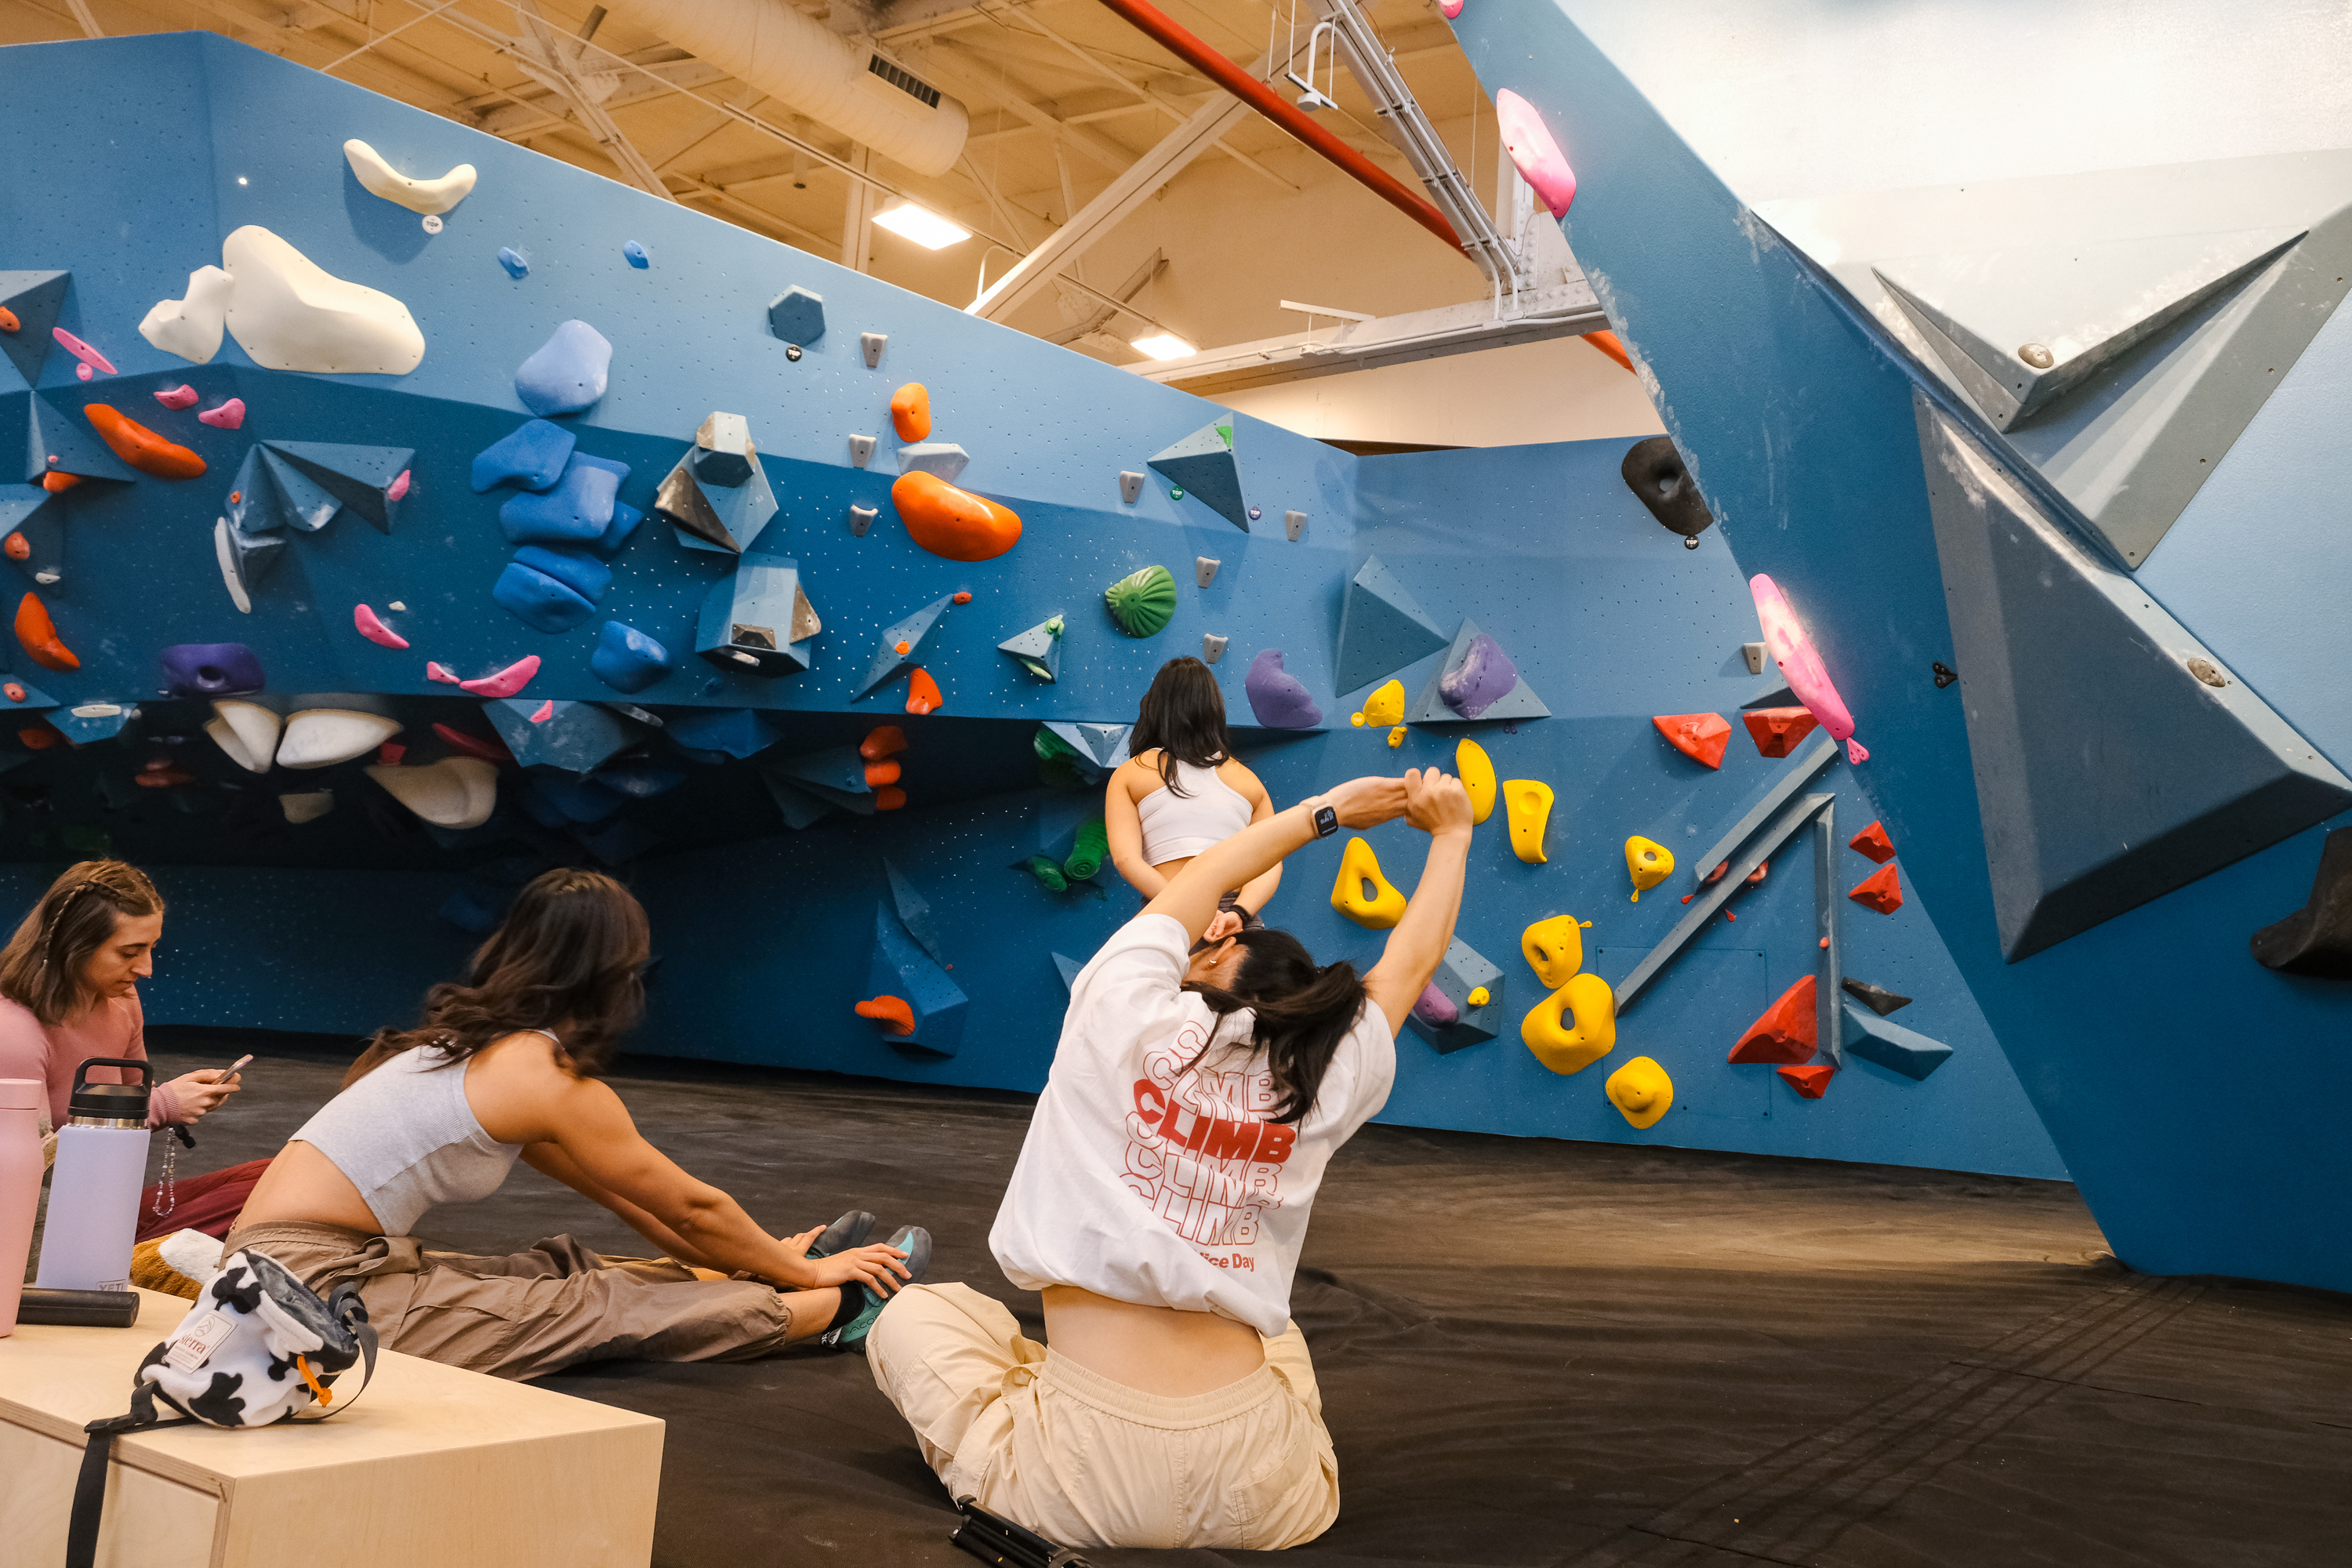 A woman stretches in front of a climbing wall.